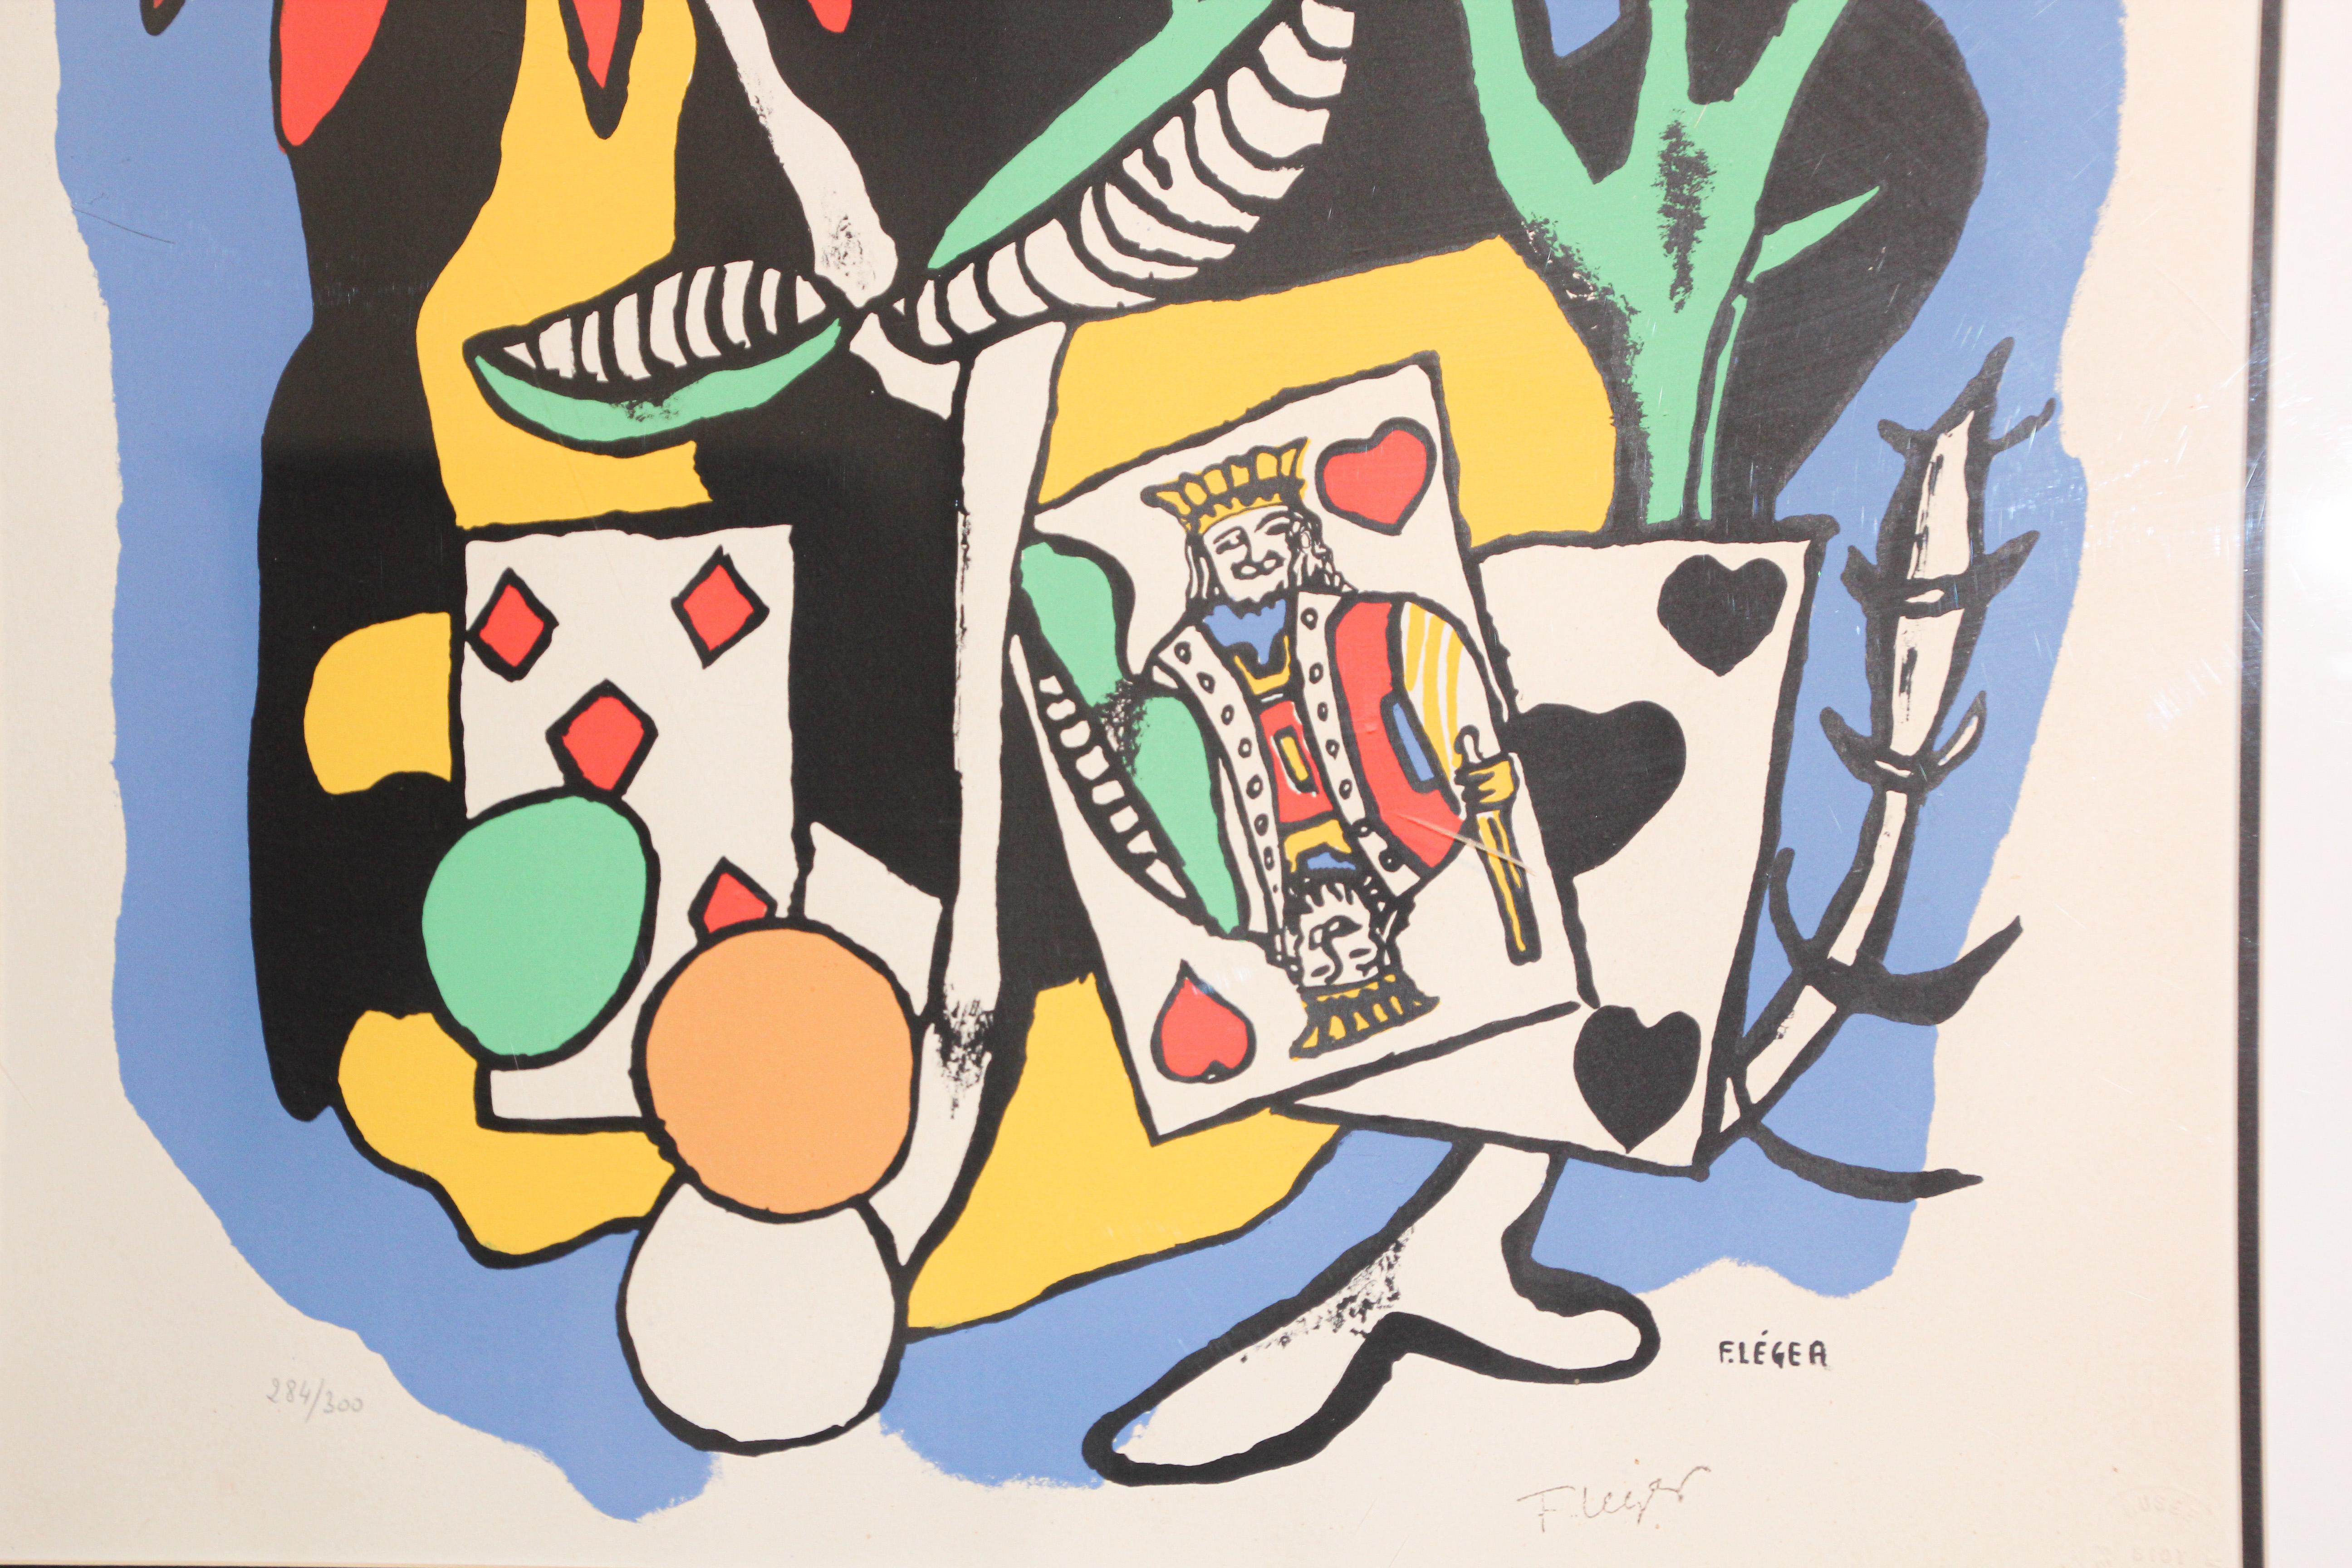 Fernand Leger The King of Heart, Signed and Numbered 284/300 Lithograph 1